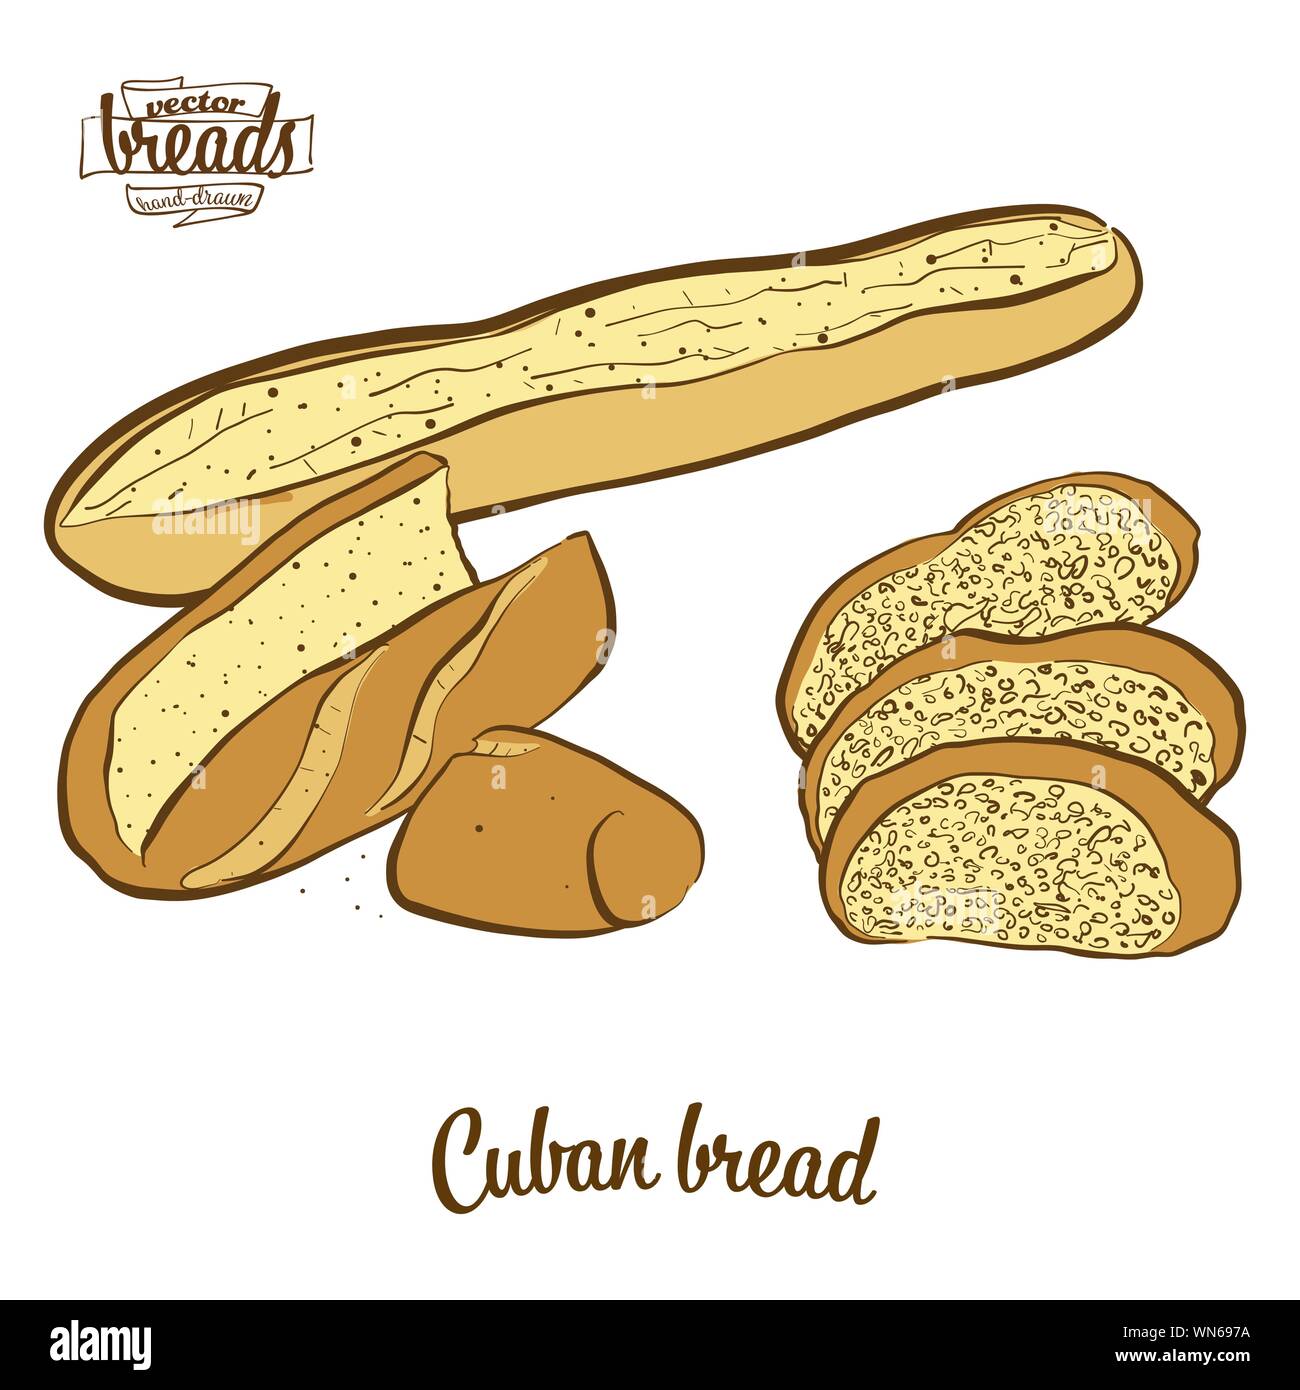 Colored drawing of Cuban bread bread. Vector illustration of Yeast bread food, usually known in United States. Colored Bread sketches. Stock Vector